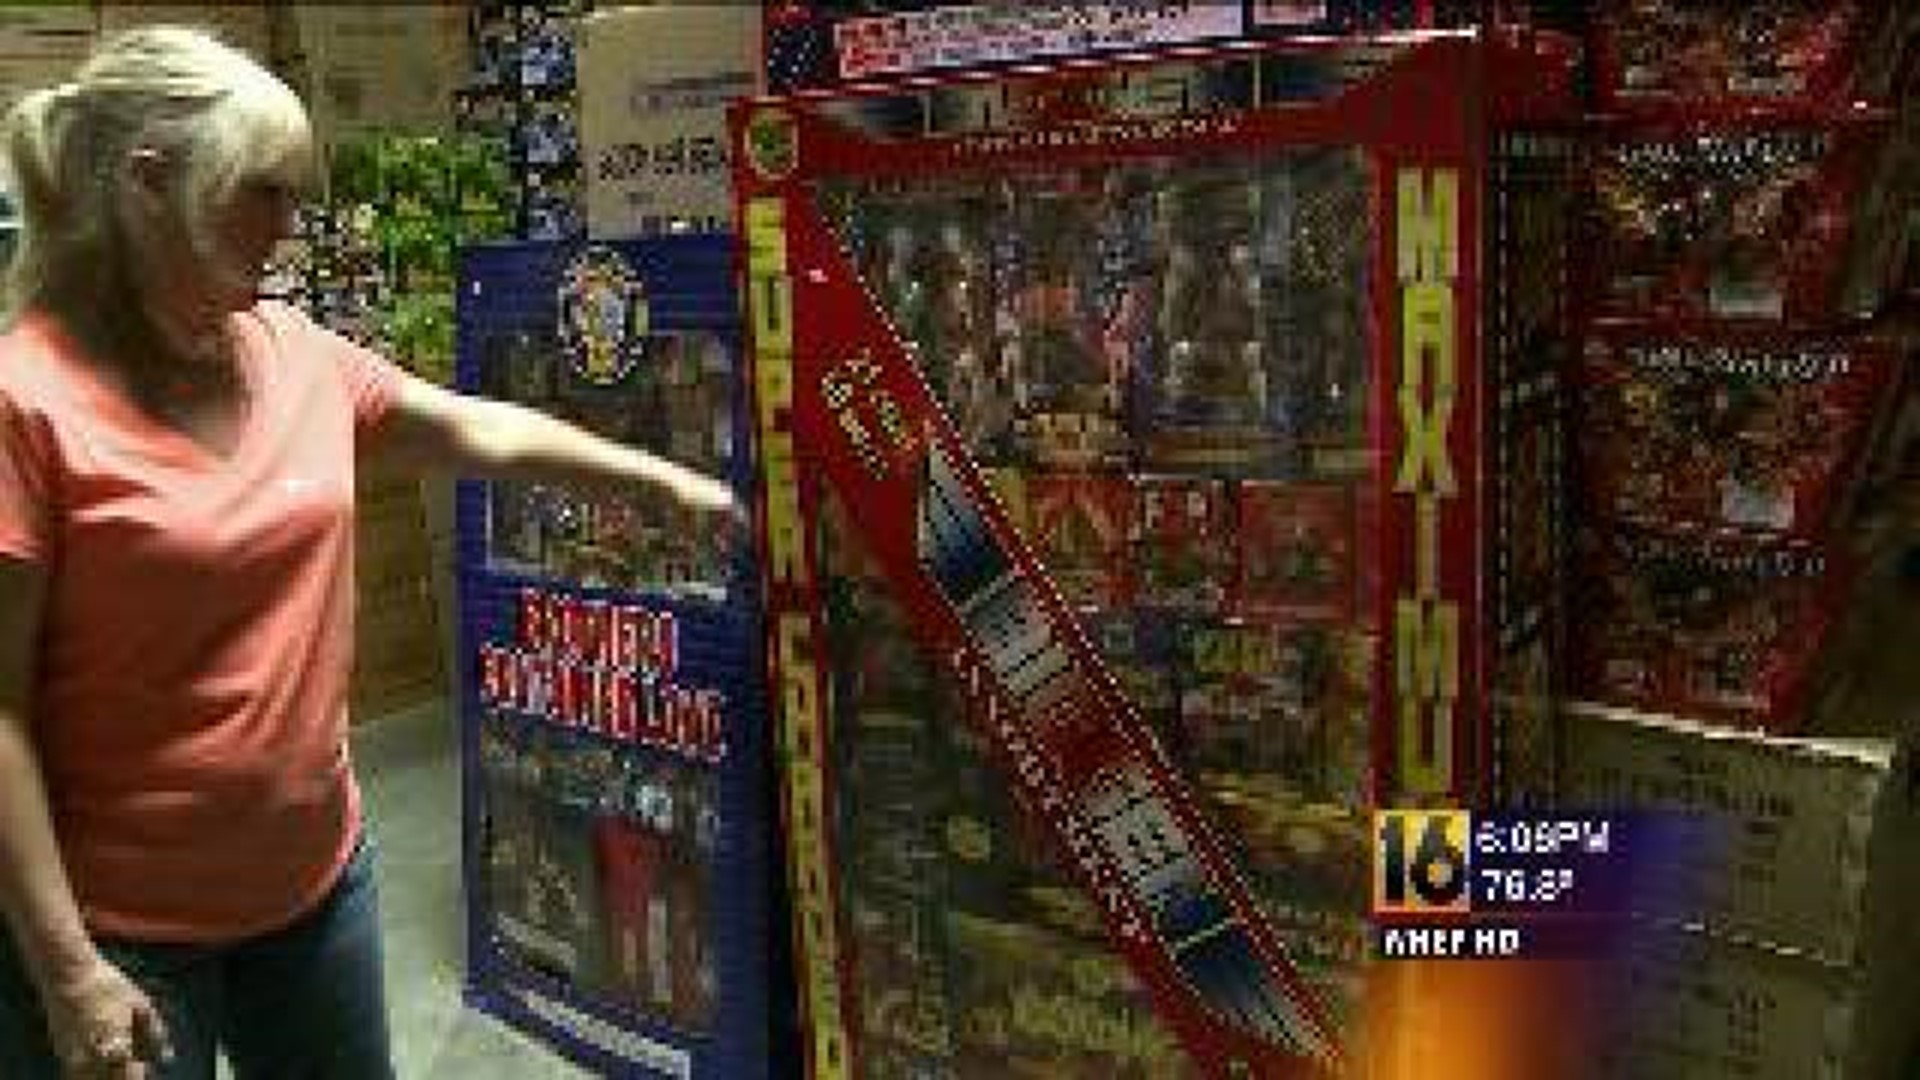 Fireworks Sales Booming in Great Bend